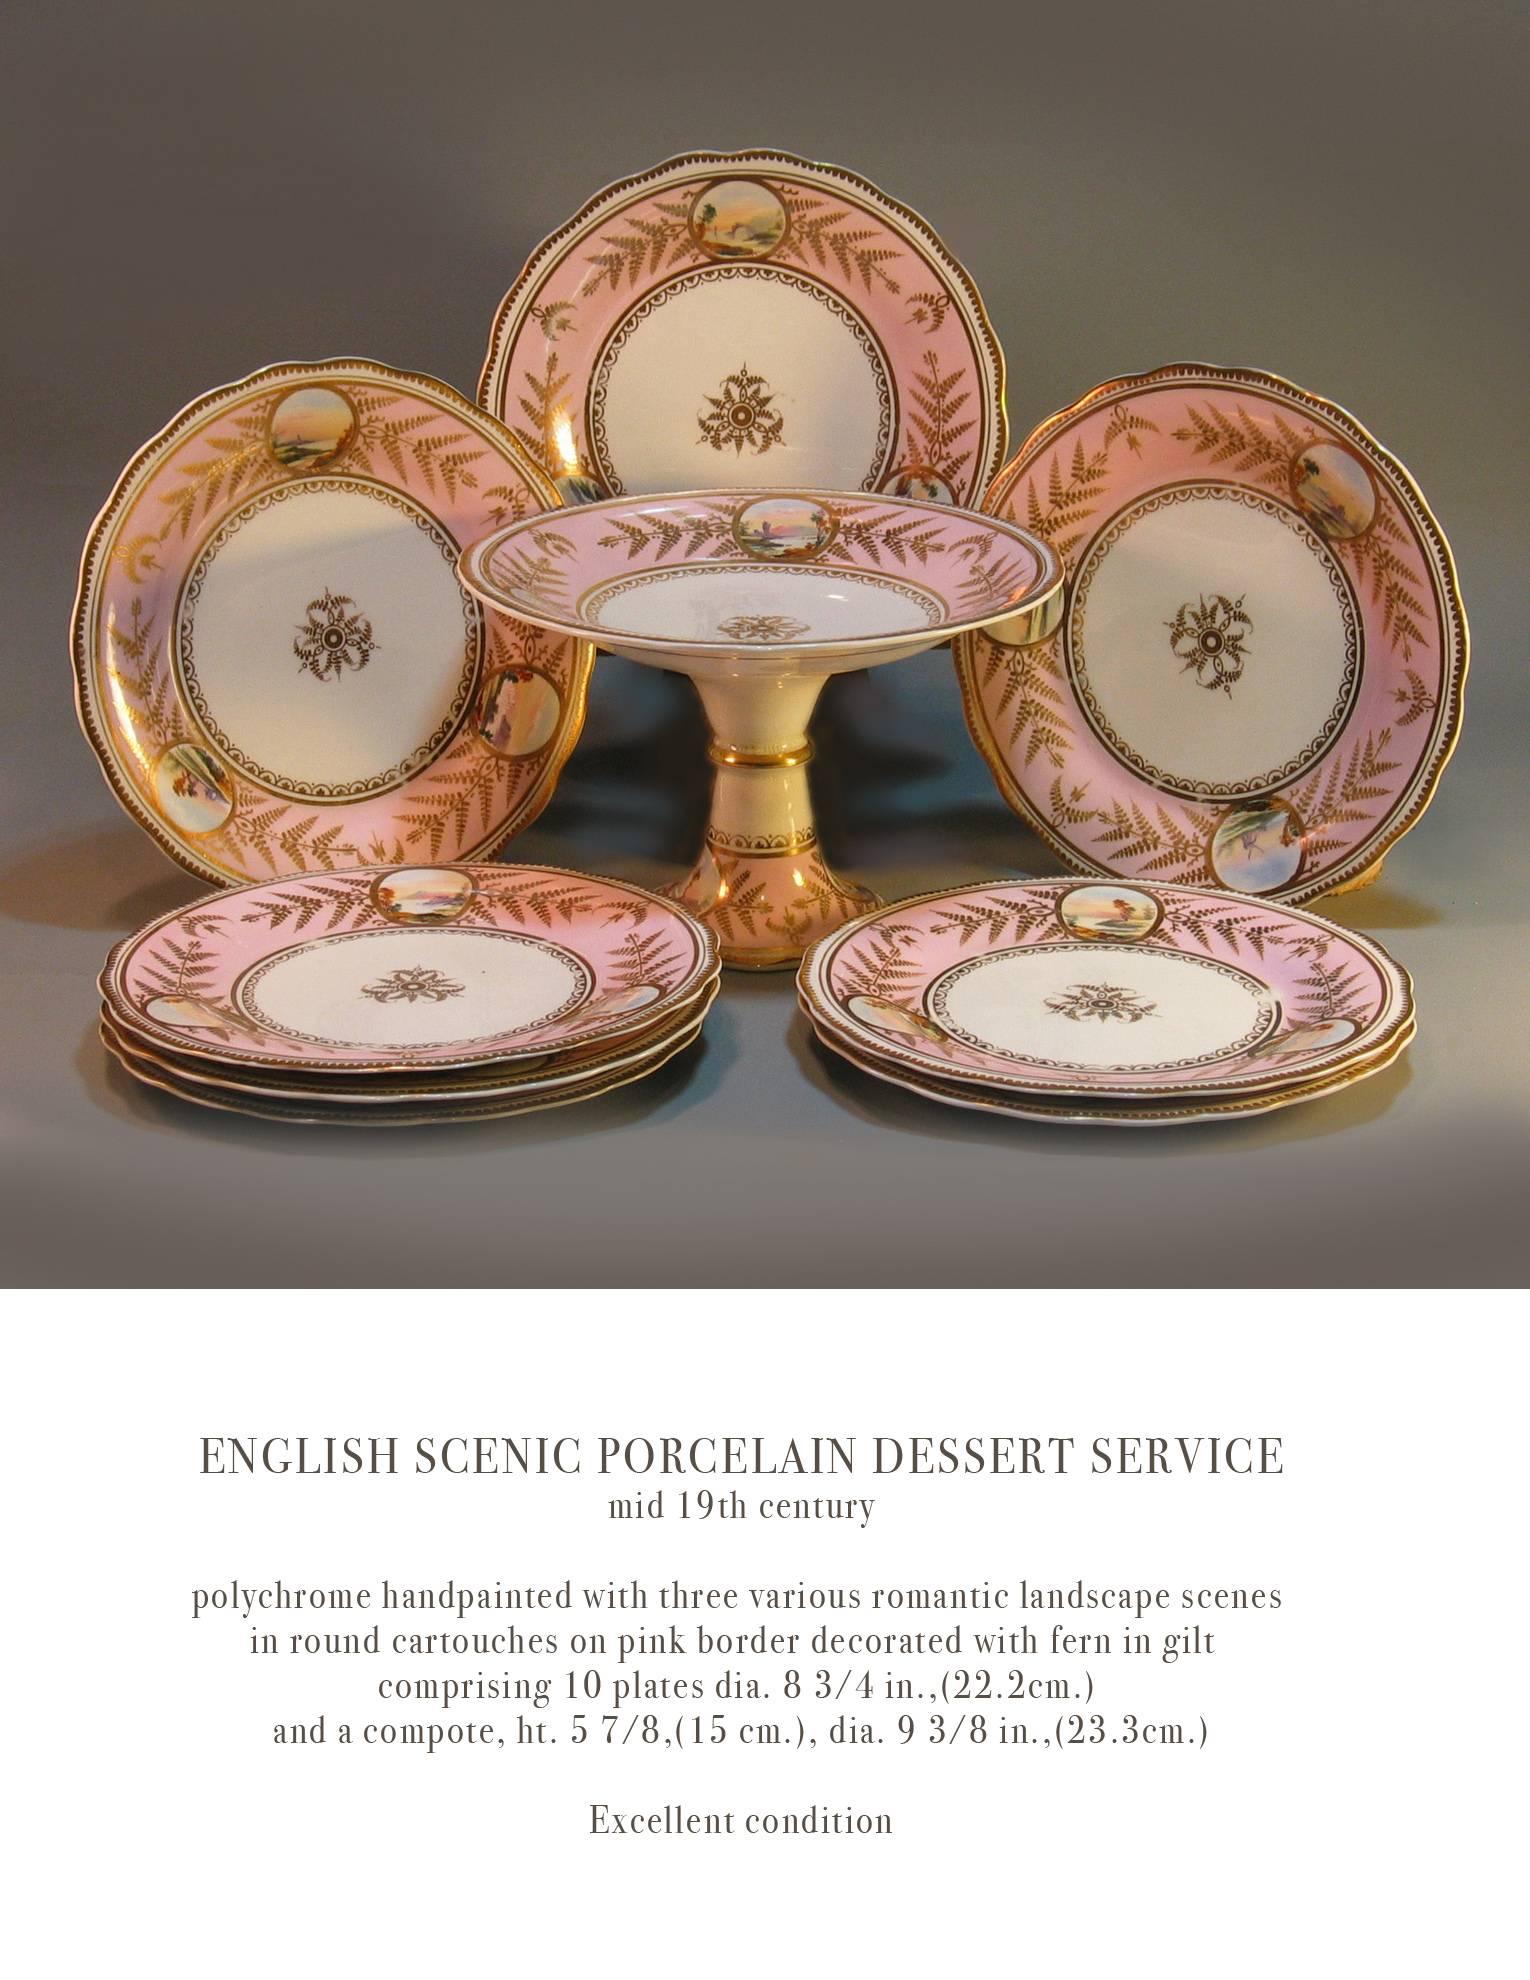 English Scenic porcelain Dessert service, mid-19th century, polychrome hand-painted with three various romantic landscape scenes in a round cartouches on a pink border, decorated with fern gilt decoration. Comprising of ten plates and a compote. The